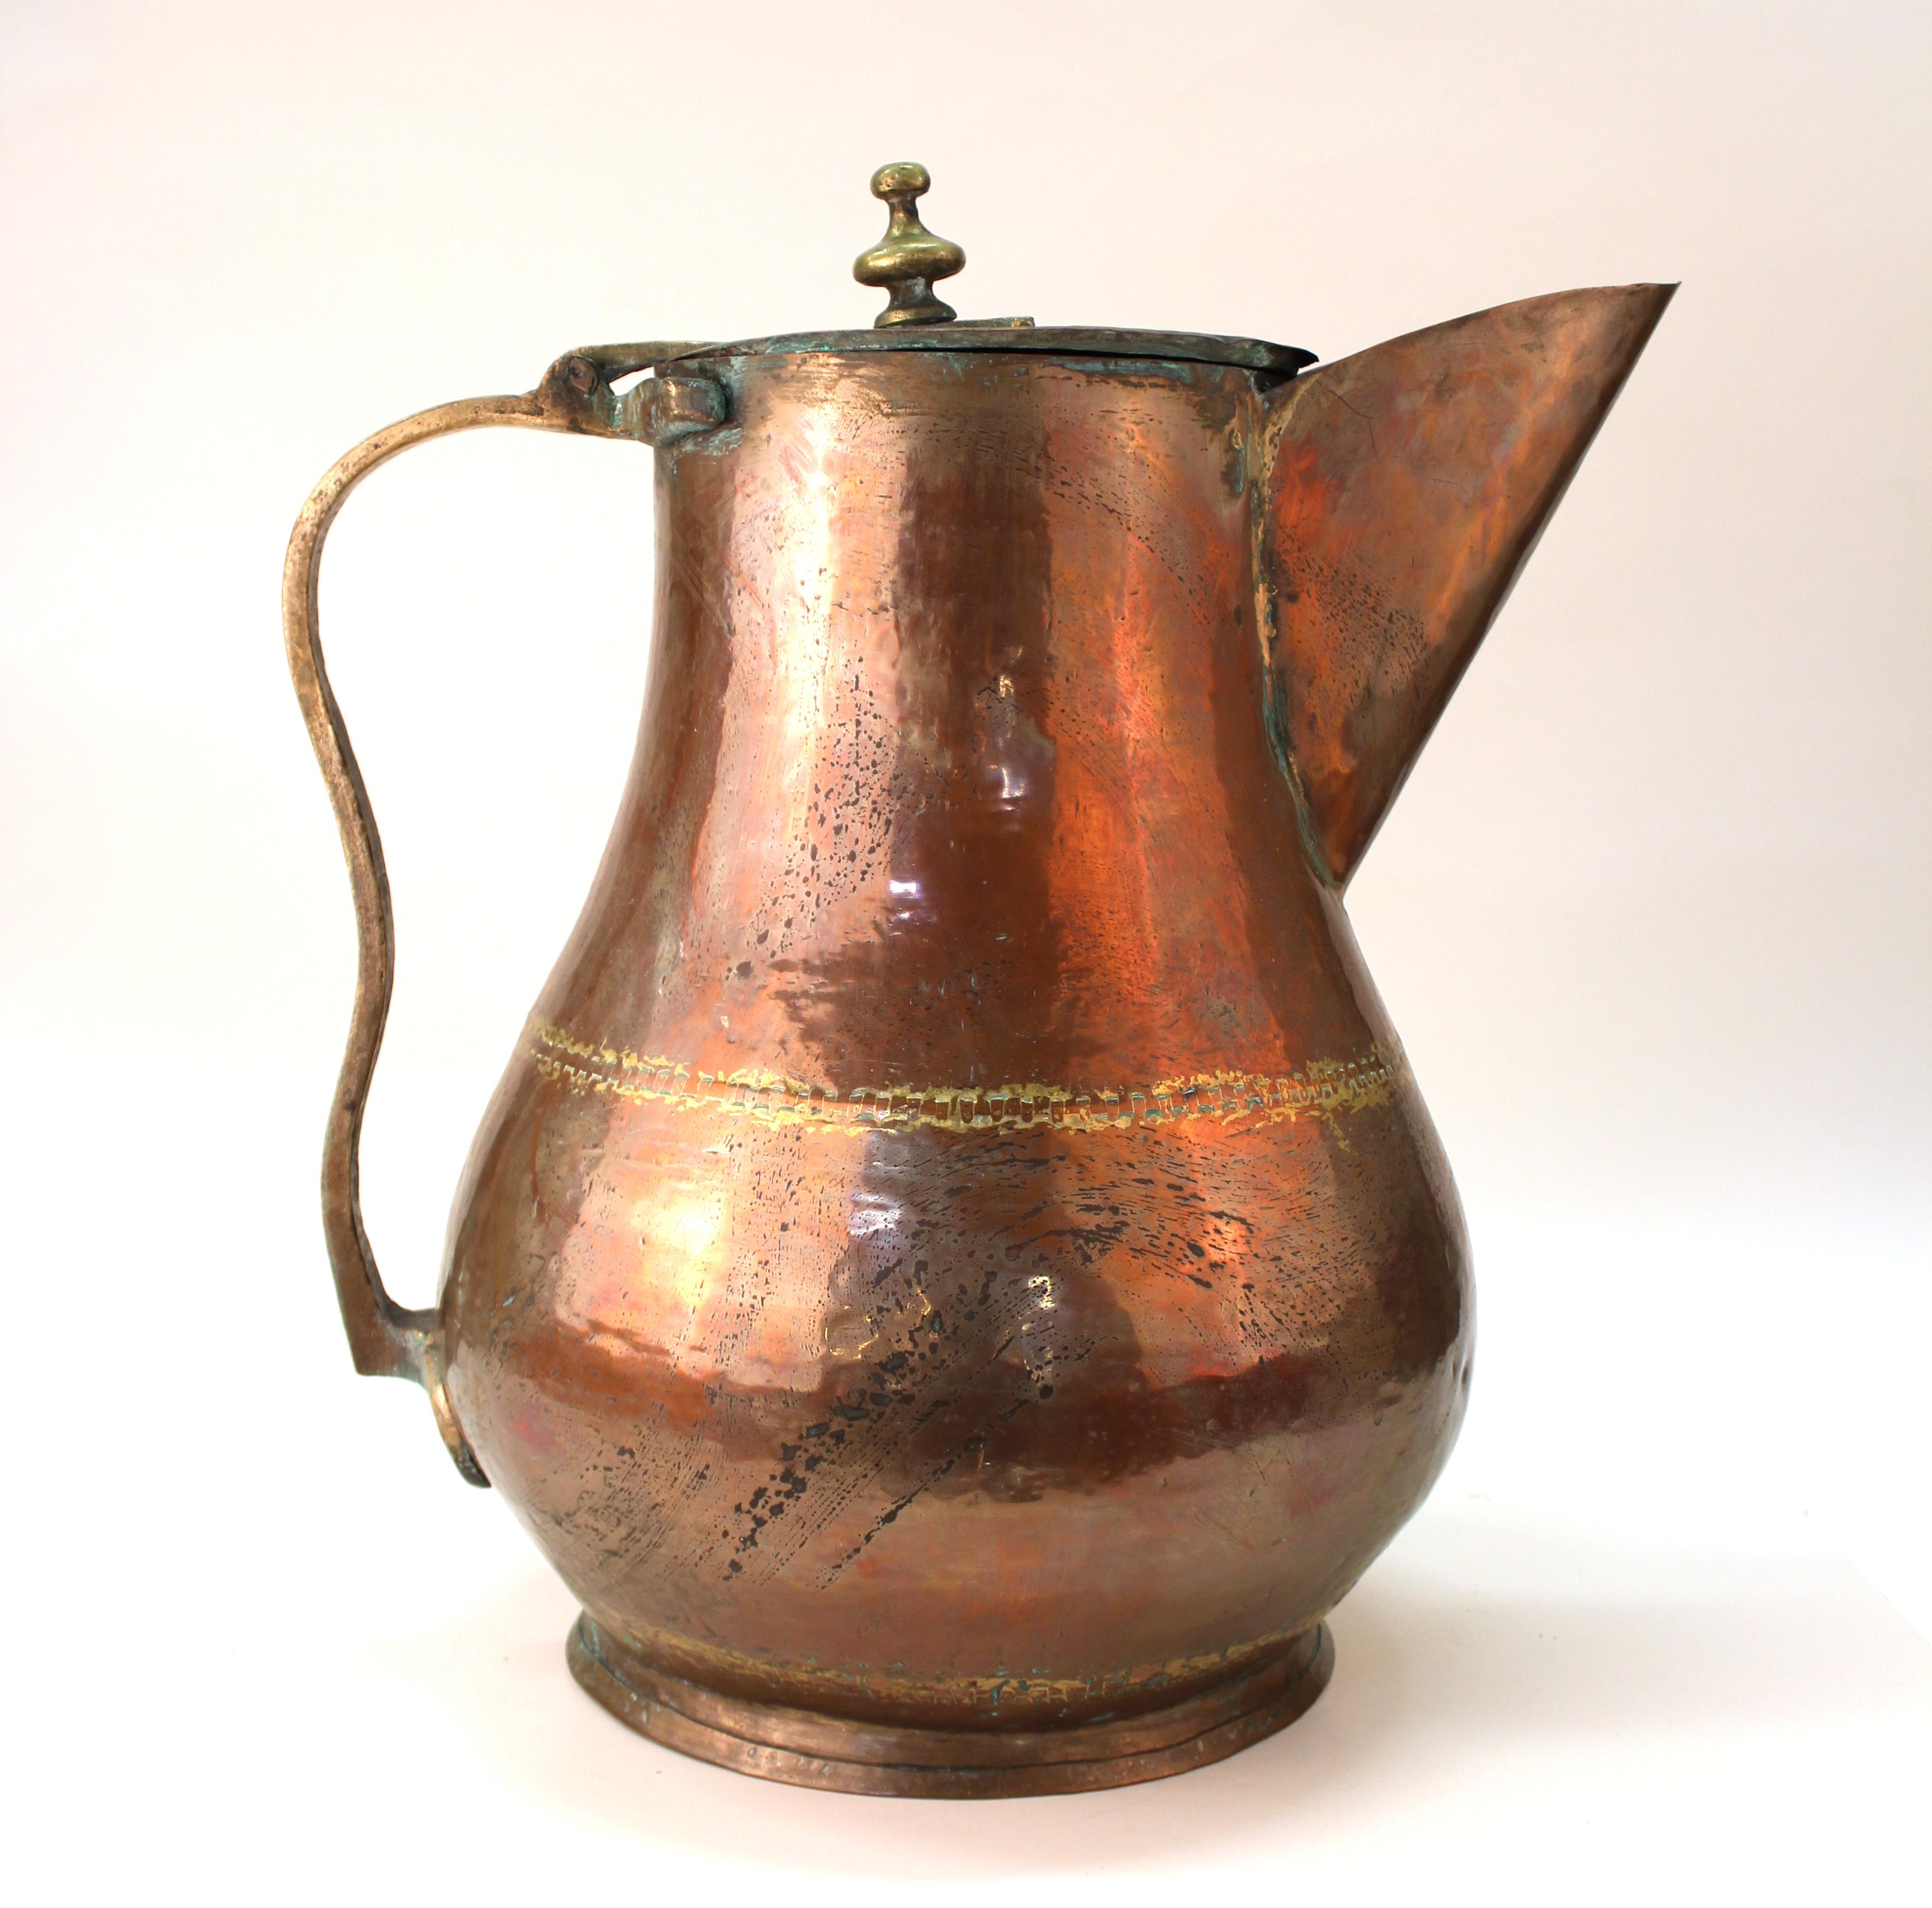 Turkish monumental sized decorative pitcher made in hammered copper with brass accents and handle. The piece does not have an egress for liquid to run into the spout as it is for decorative purposes only. In great vintage condition with